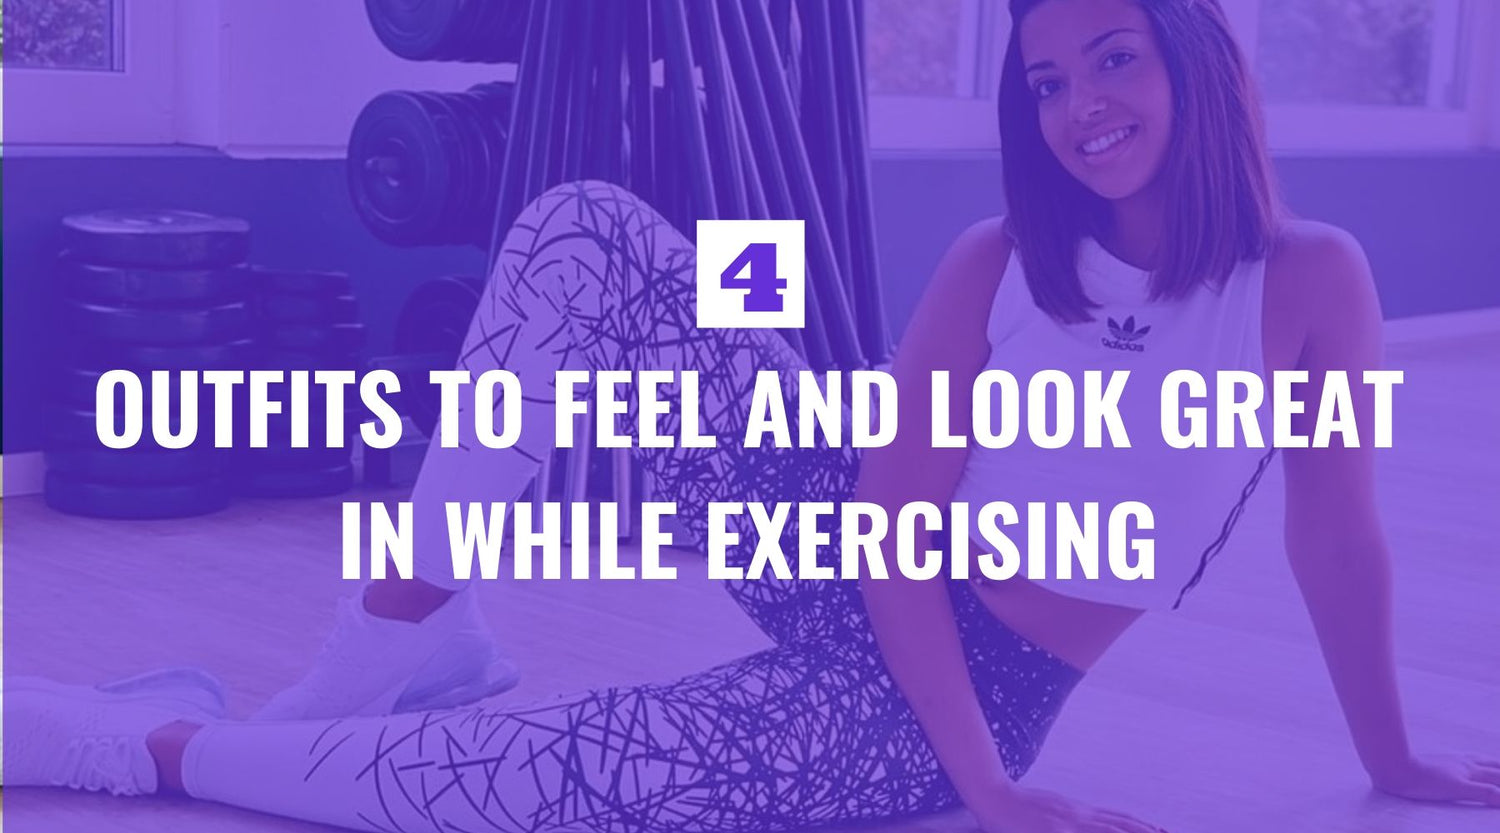 Four Outfits to Feel and Look Great in While Exercising